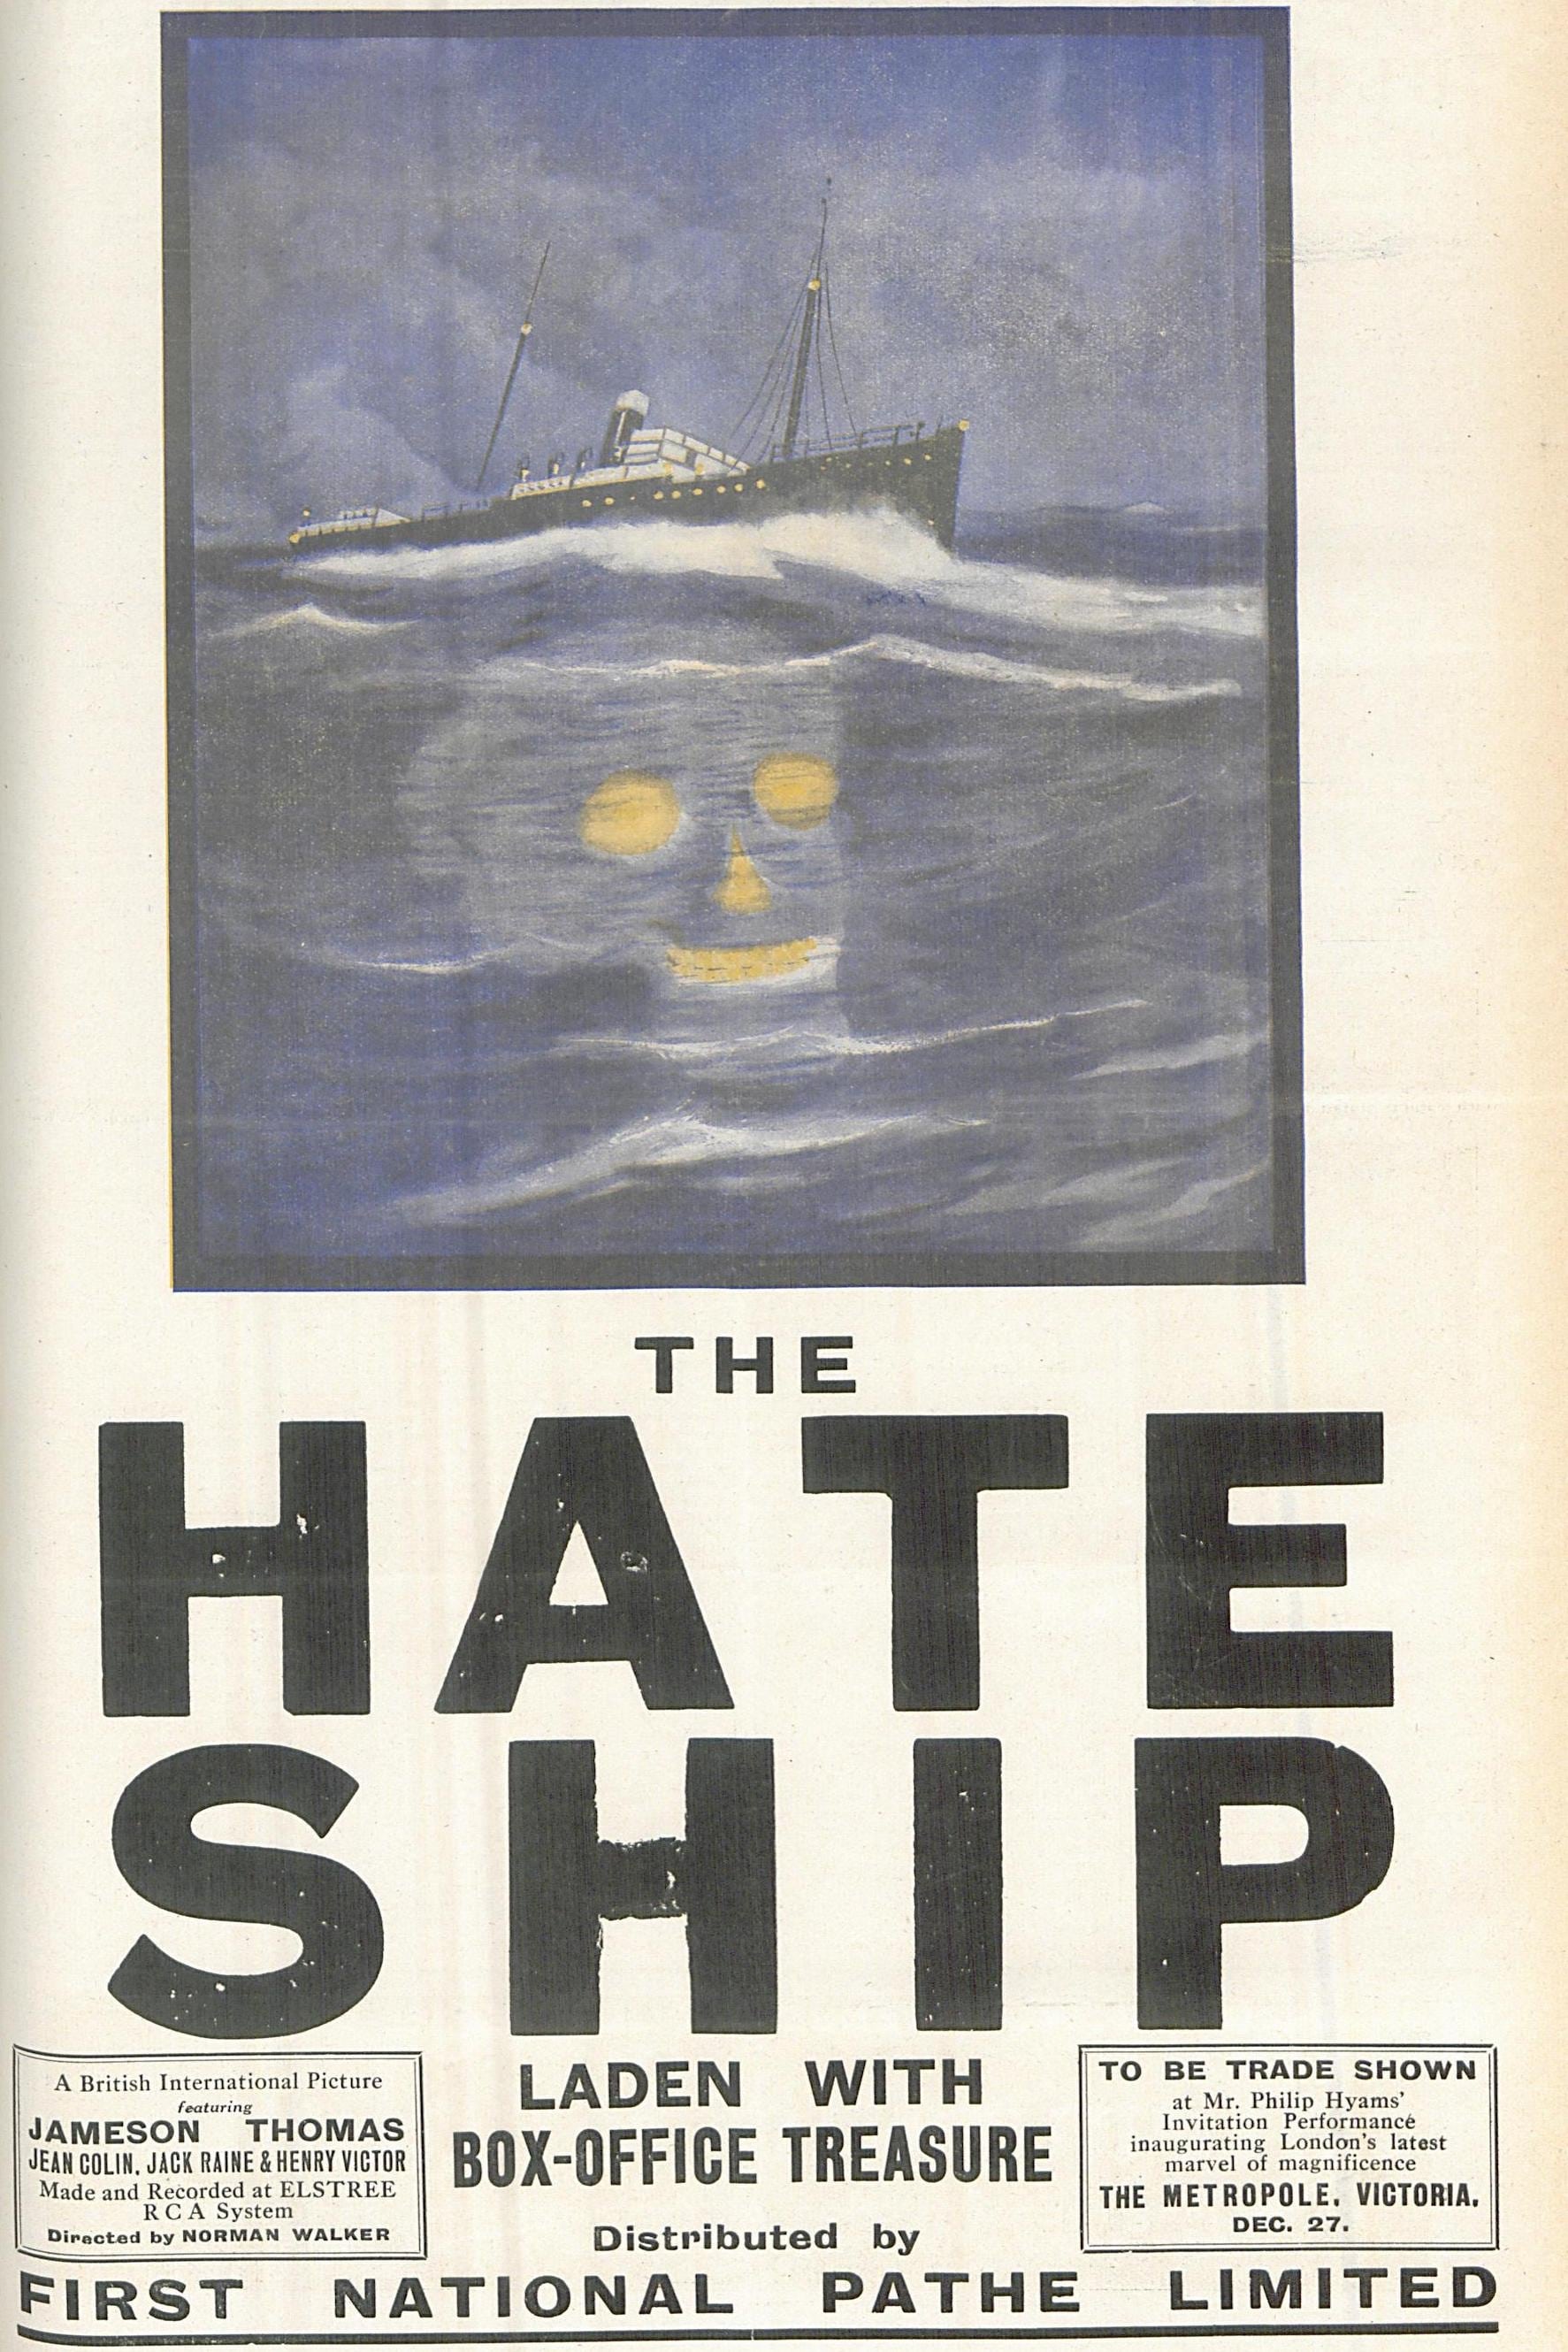 The Hate Ship